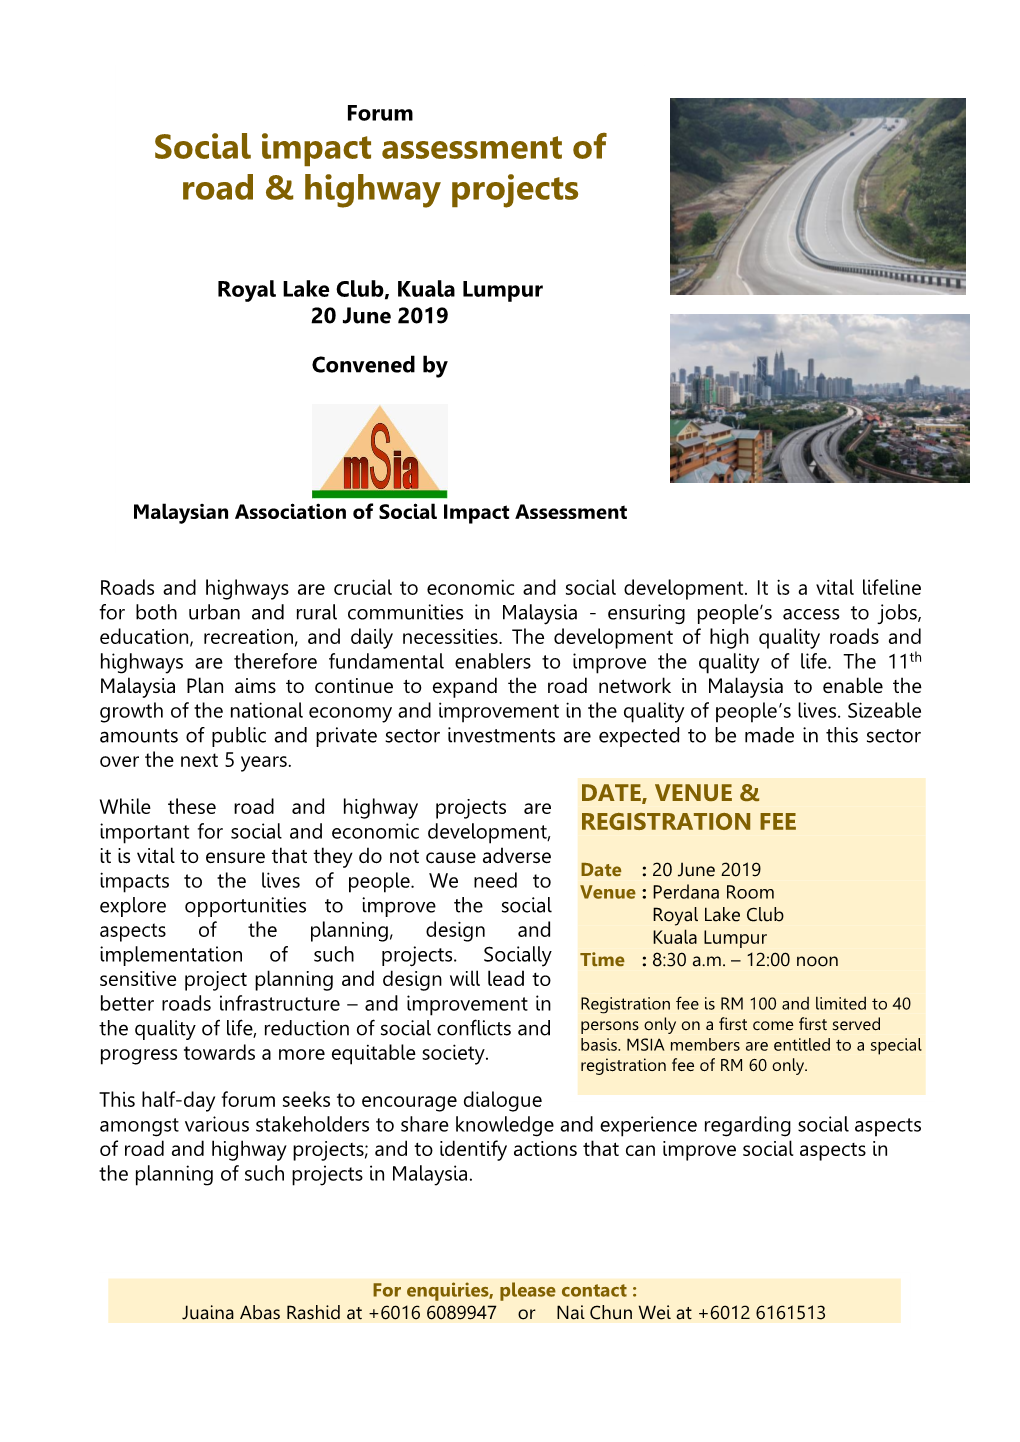 Social Impact Assessment of Road & Highway Projects